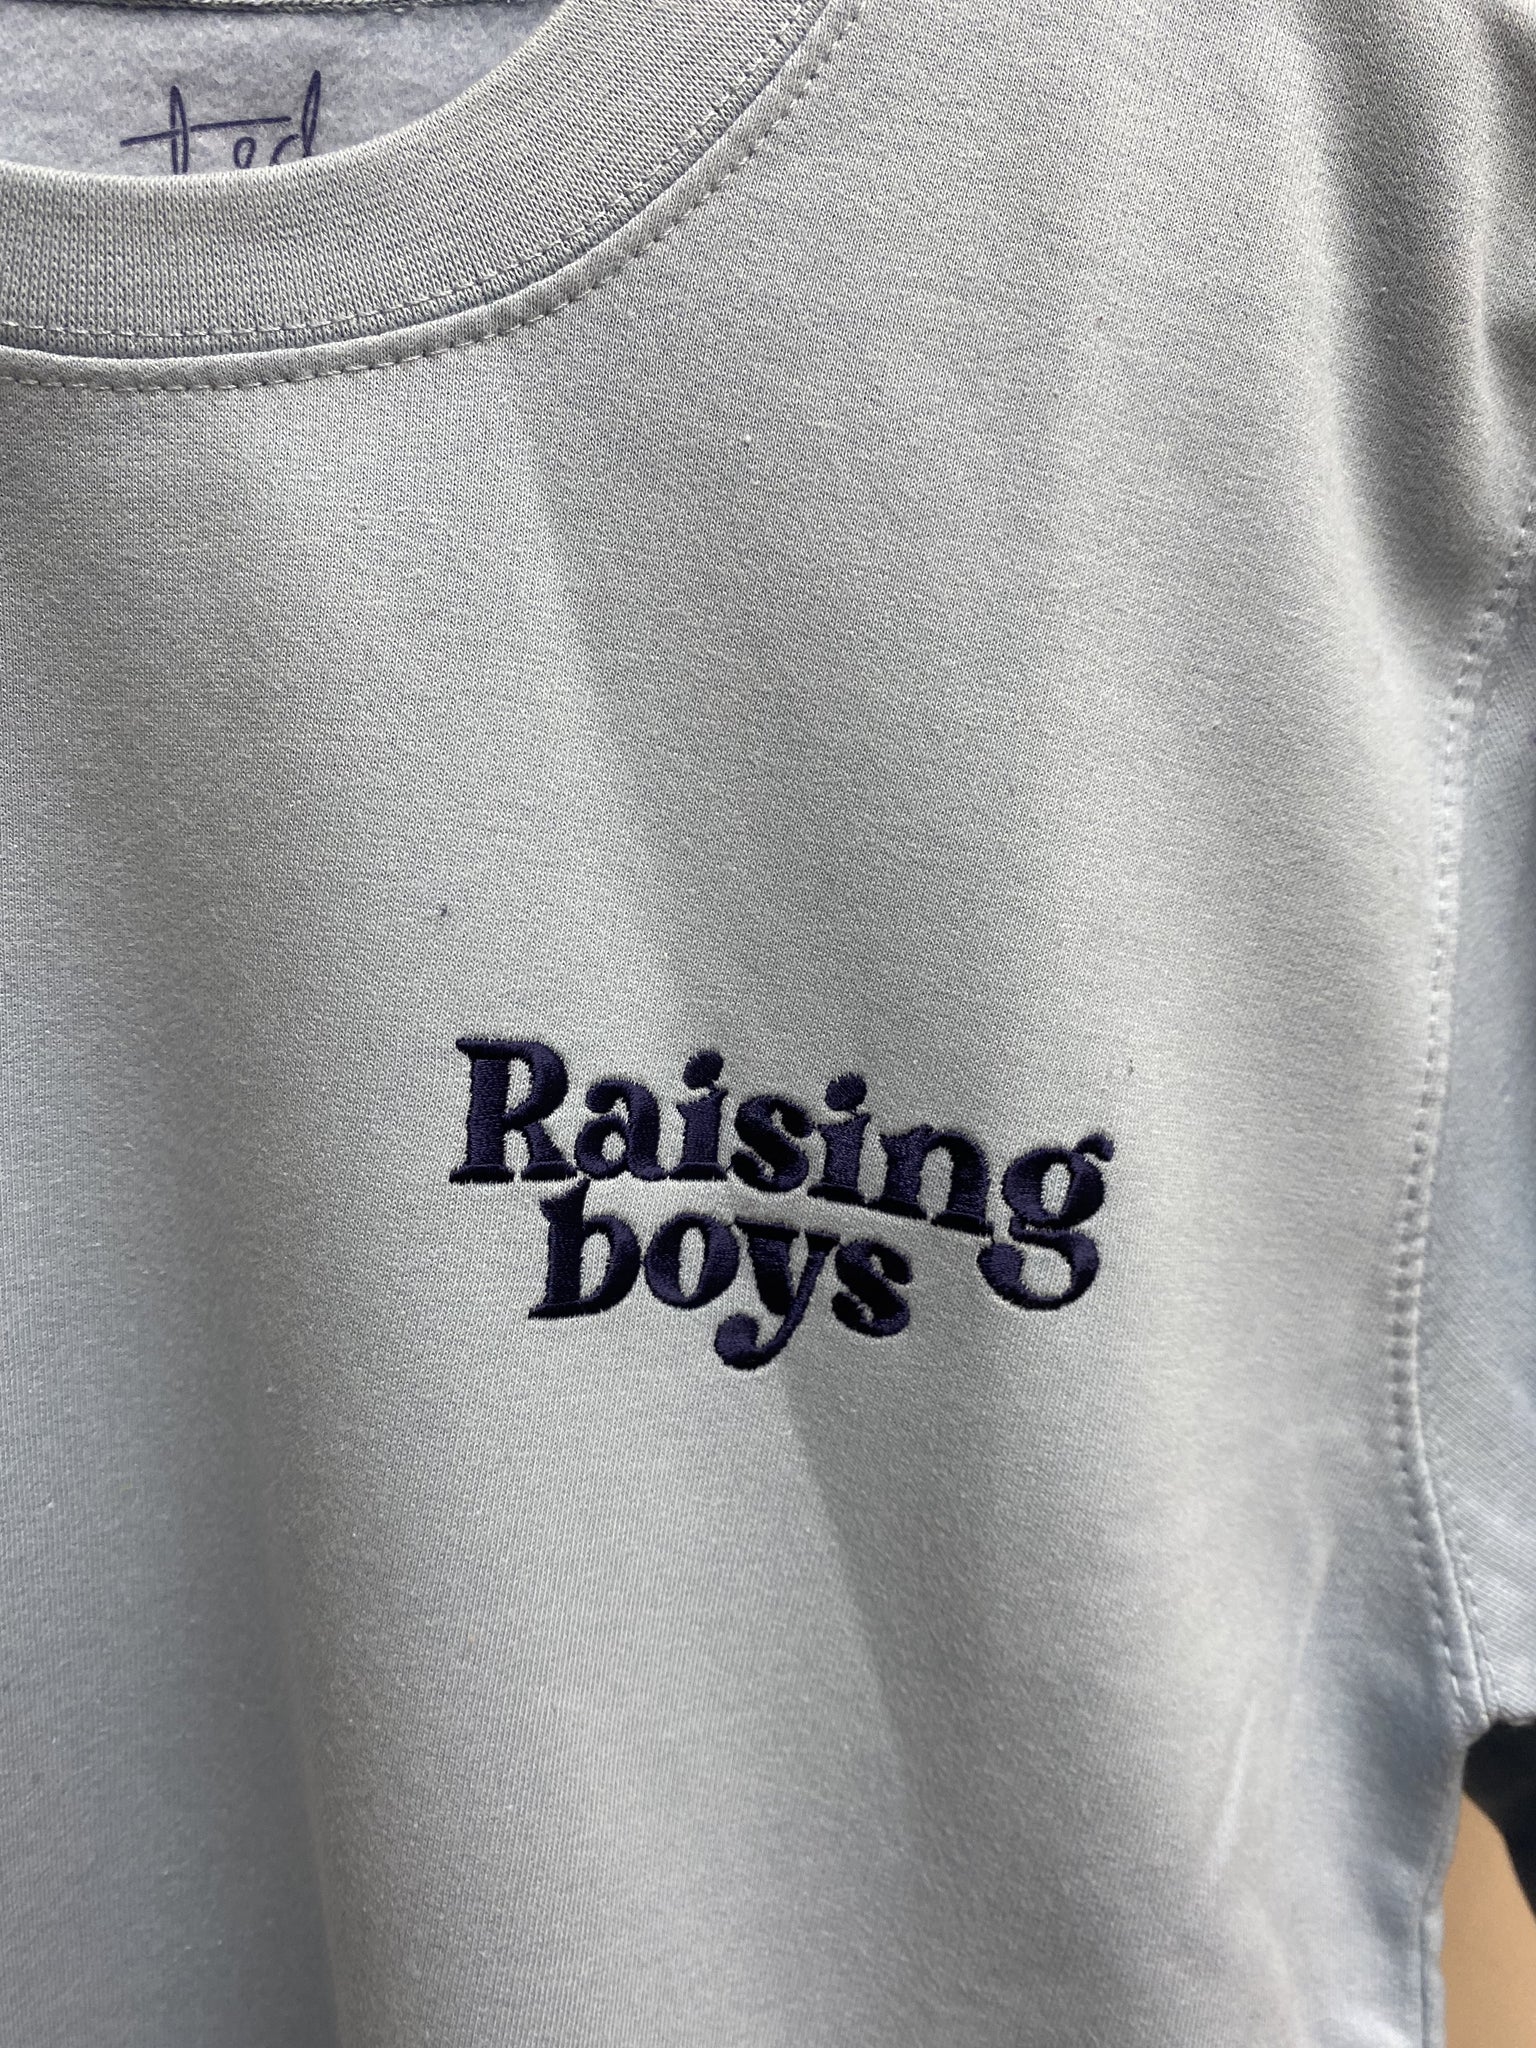 SAMPLE SALE 'Raising Boys' baby blue sweater with navy stitching, XS, S, M